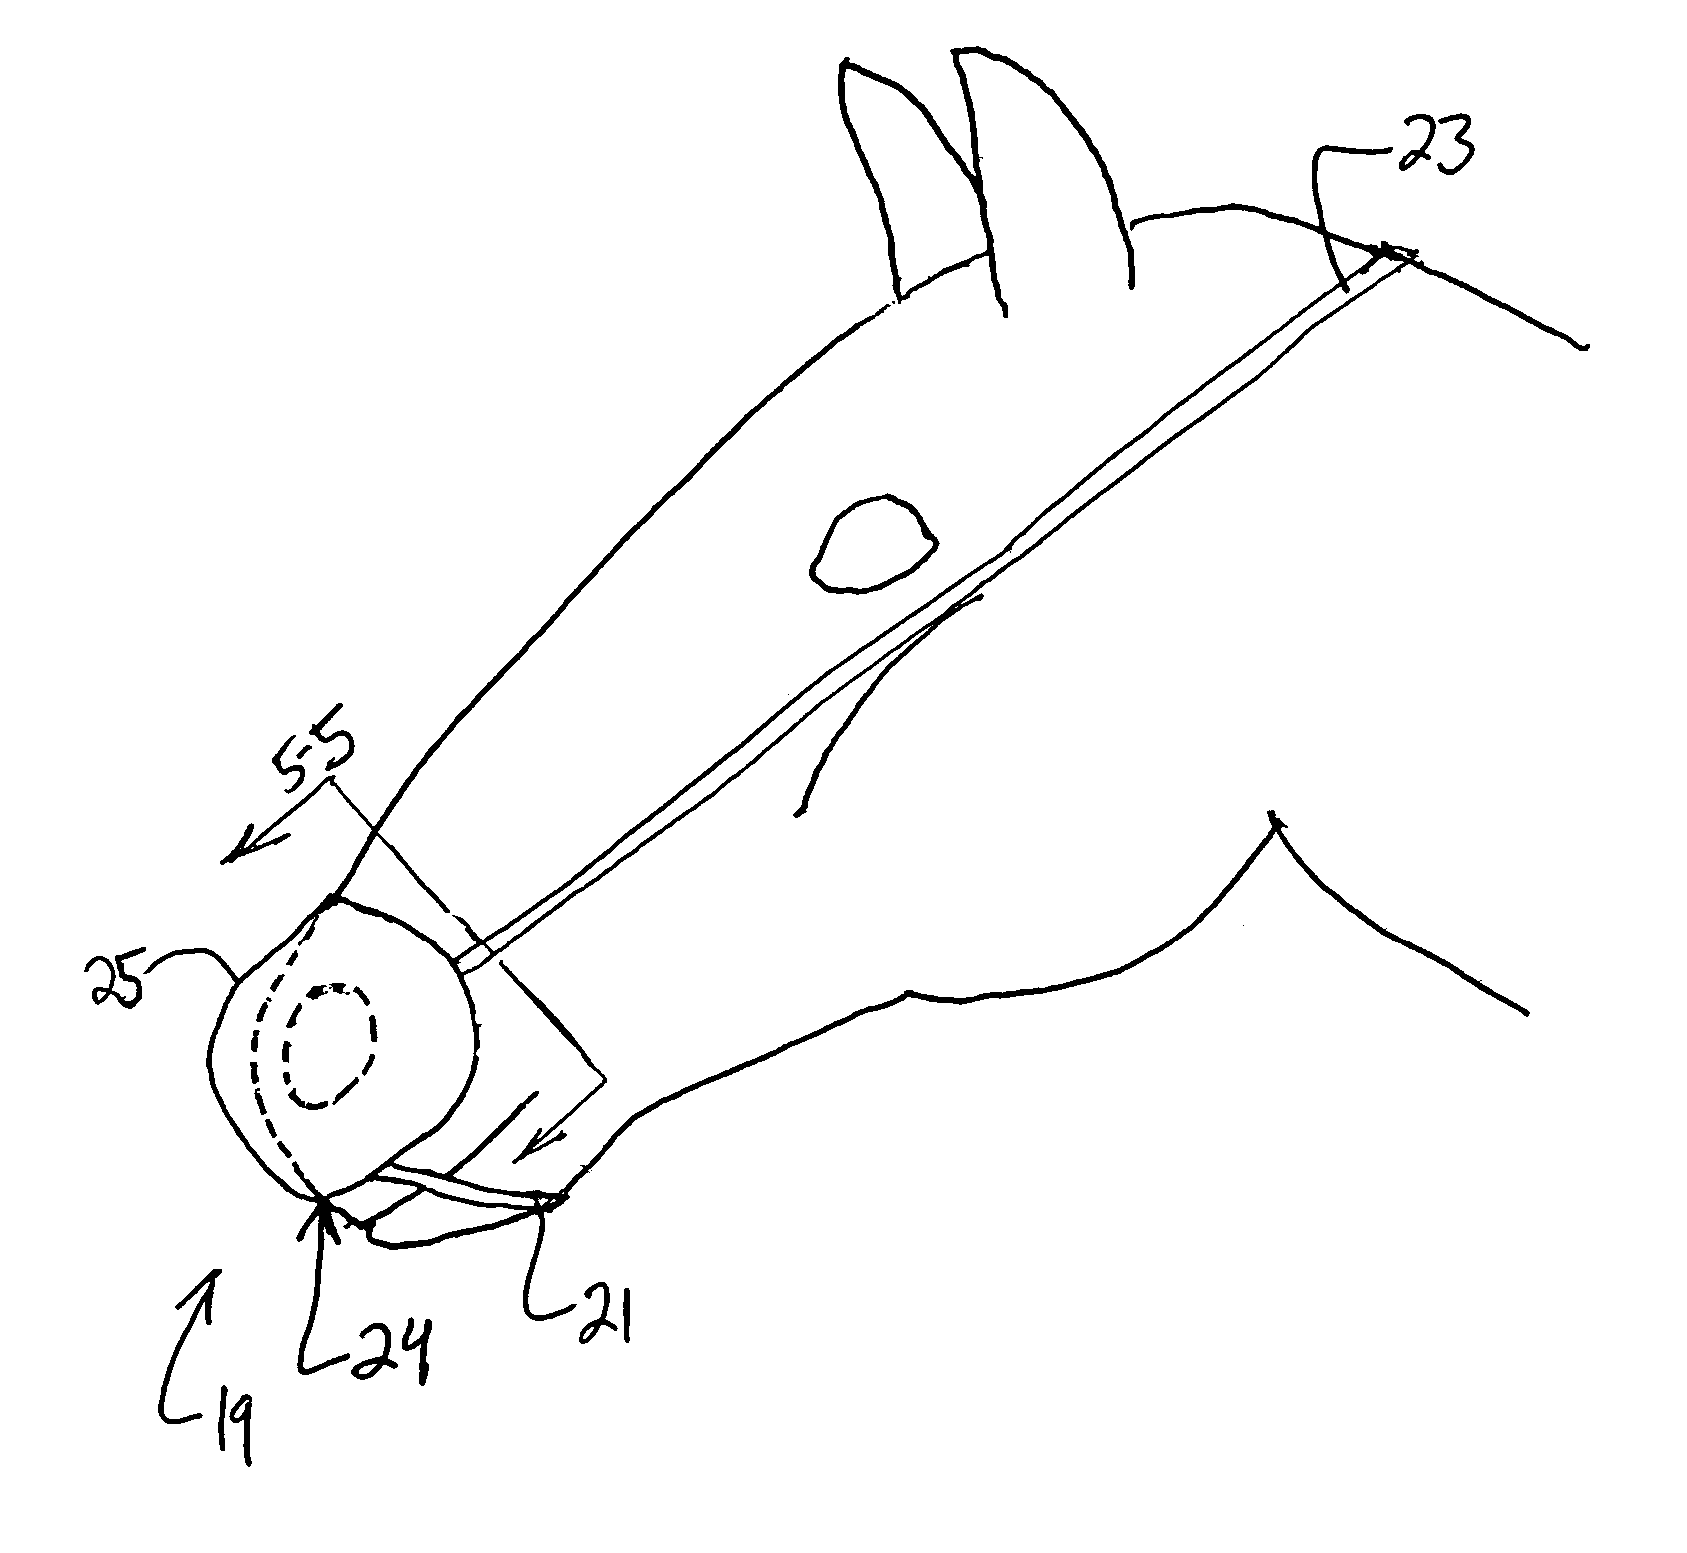 Method and apparatus for filtering air entering an animal's nostrils